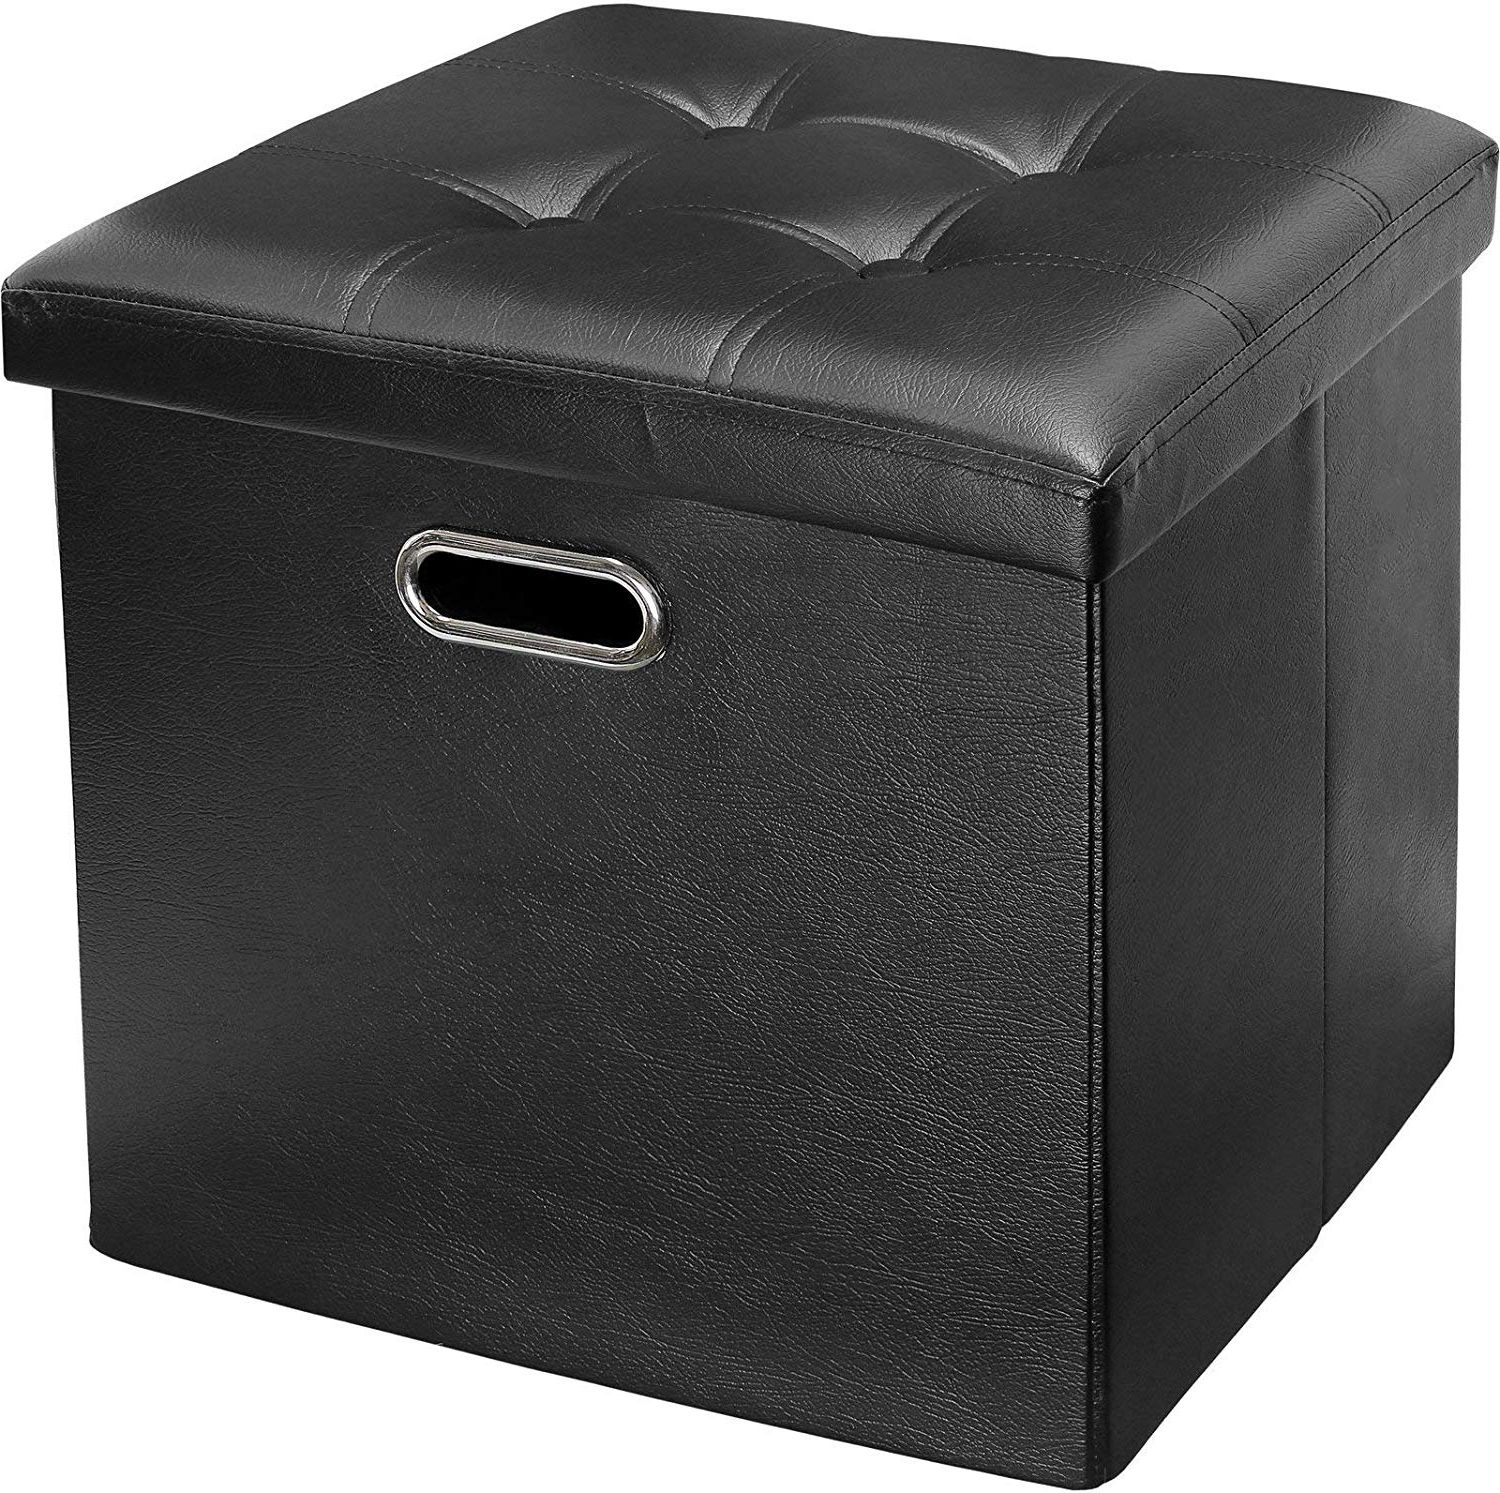 Black Faux Leather Ottomans With Pull Tab Inside Fashionable Faux Leather, Tufted, Ottoman Stool Seat And Foot Rest, Collapsible (View 3 of 10)